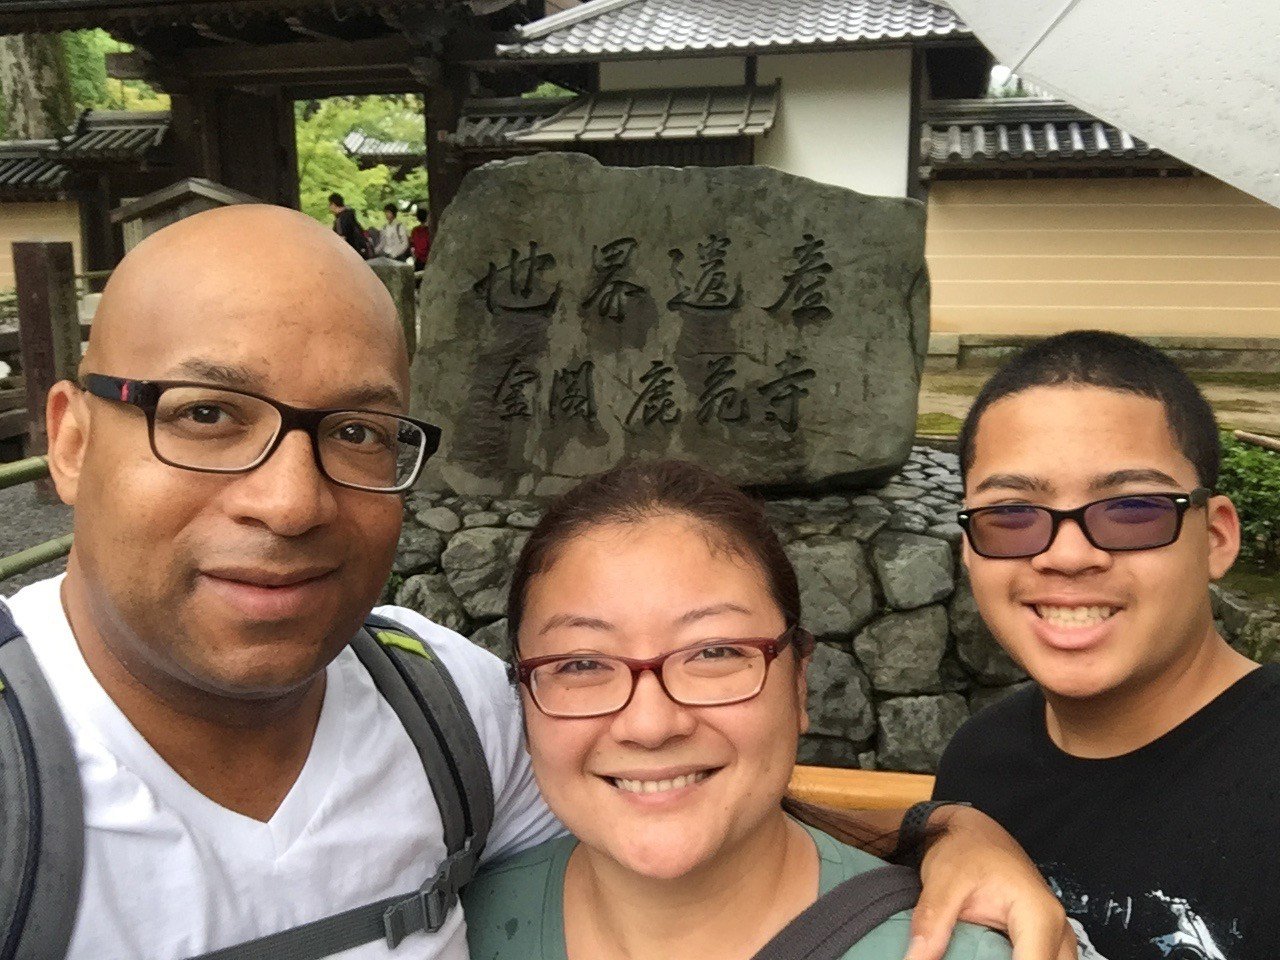 What Should You Wear While Traveling In Japan - Summer Trip To Japan - Kinkakuji Temple